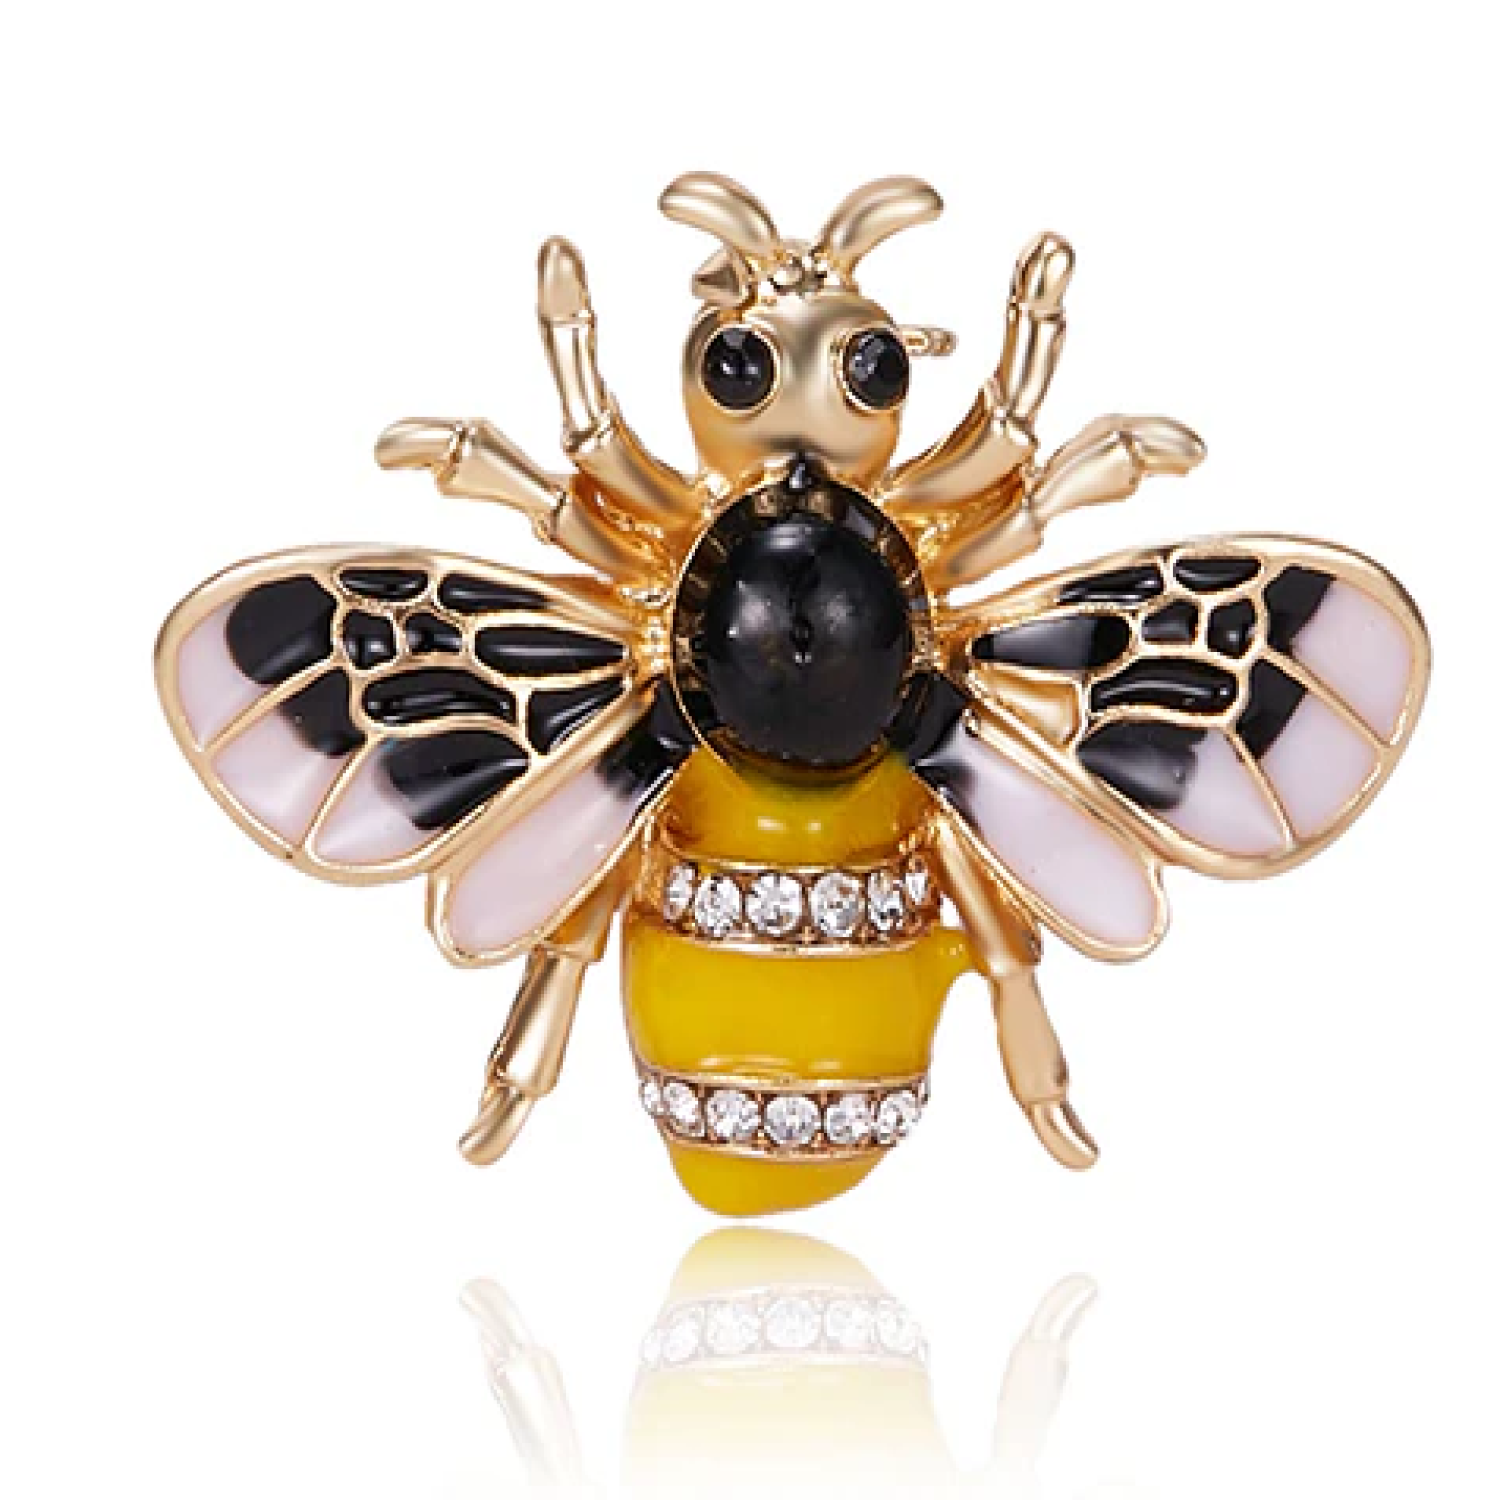 LMH Pin Pinback Tie Lapel Brooch HONEY BEE Smiling Face on Small